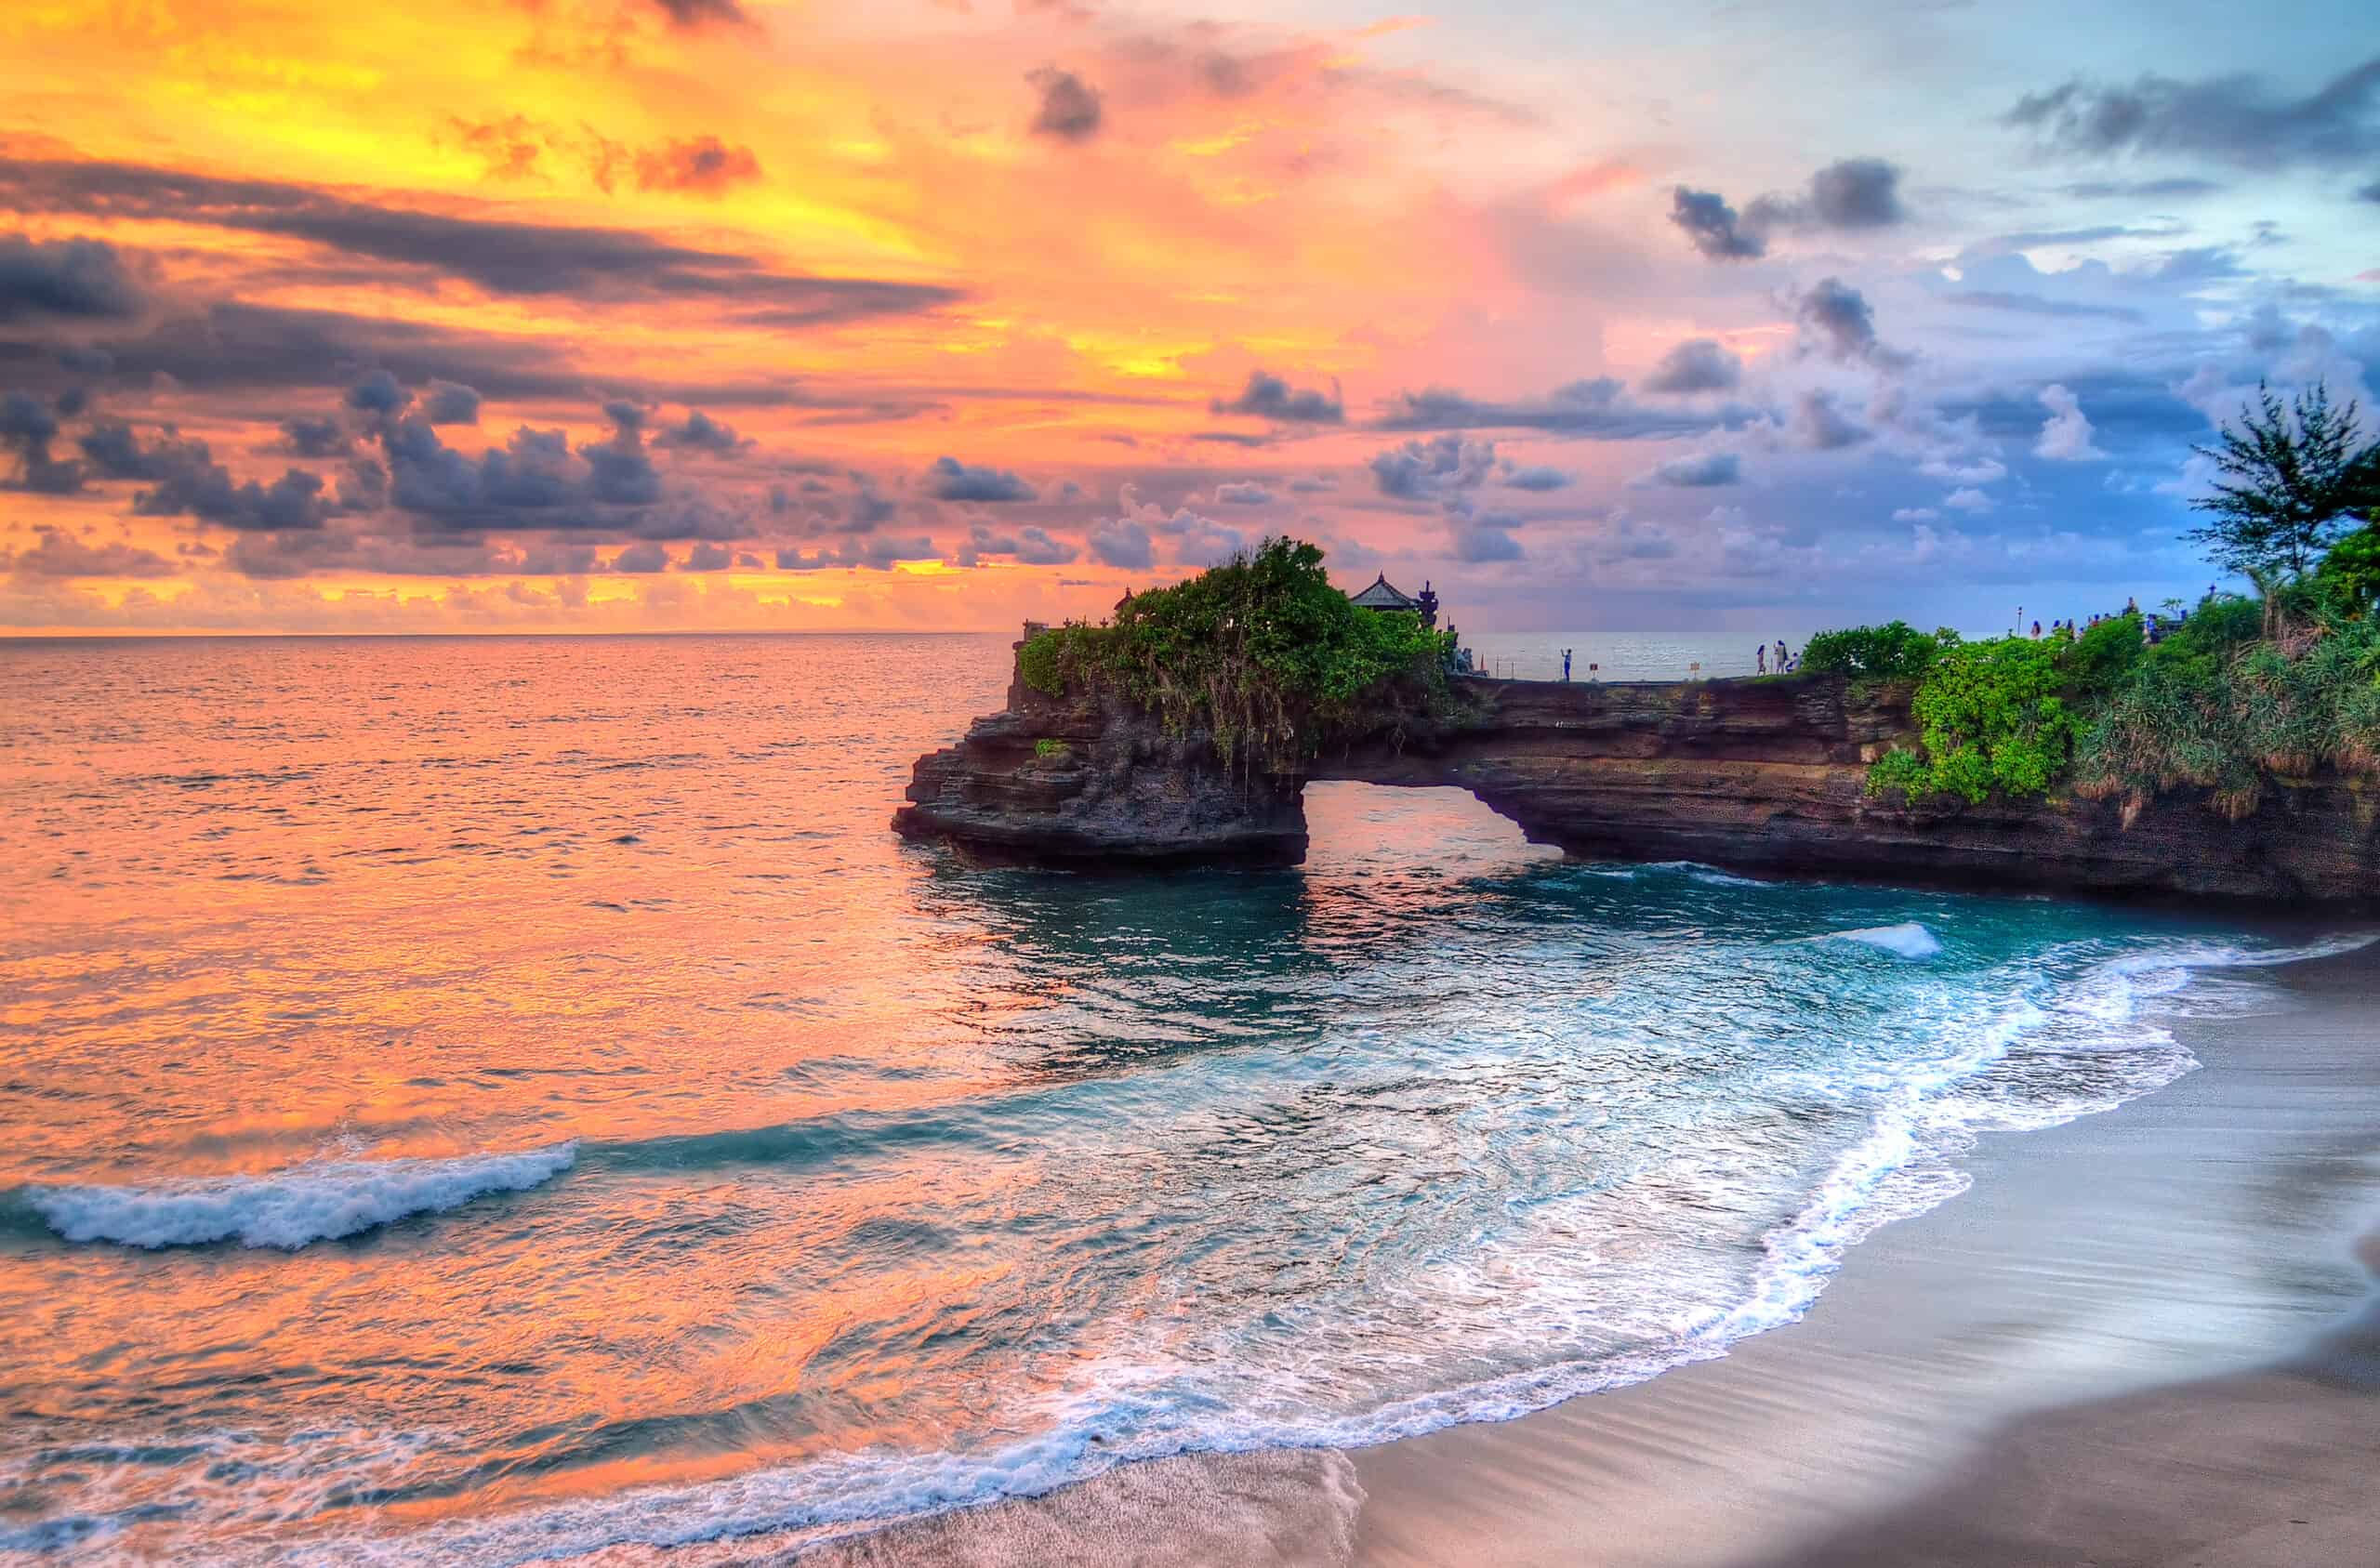 Nusa Dua Bali: 10 Good, Bad & Ugly Truths About Vacations Here